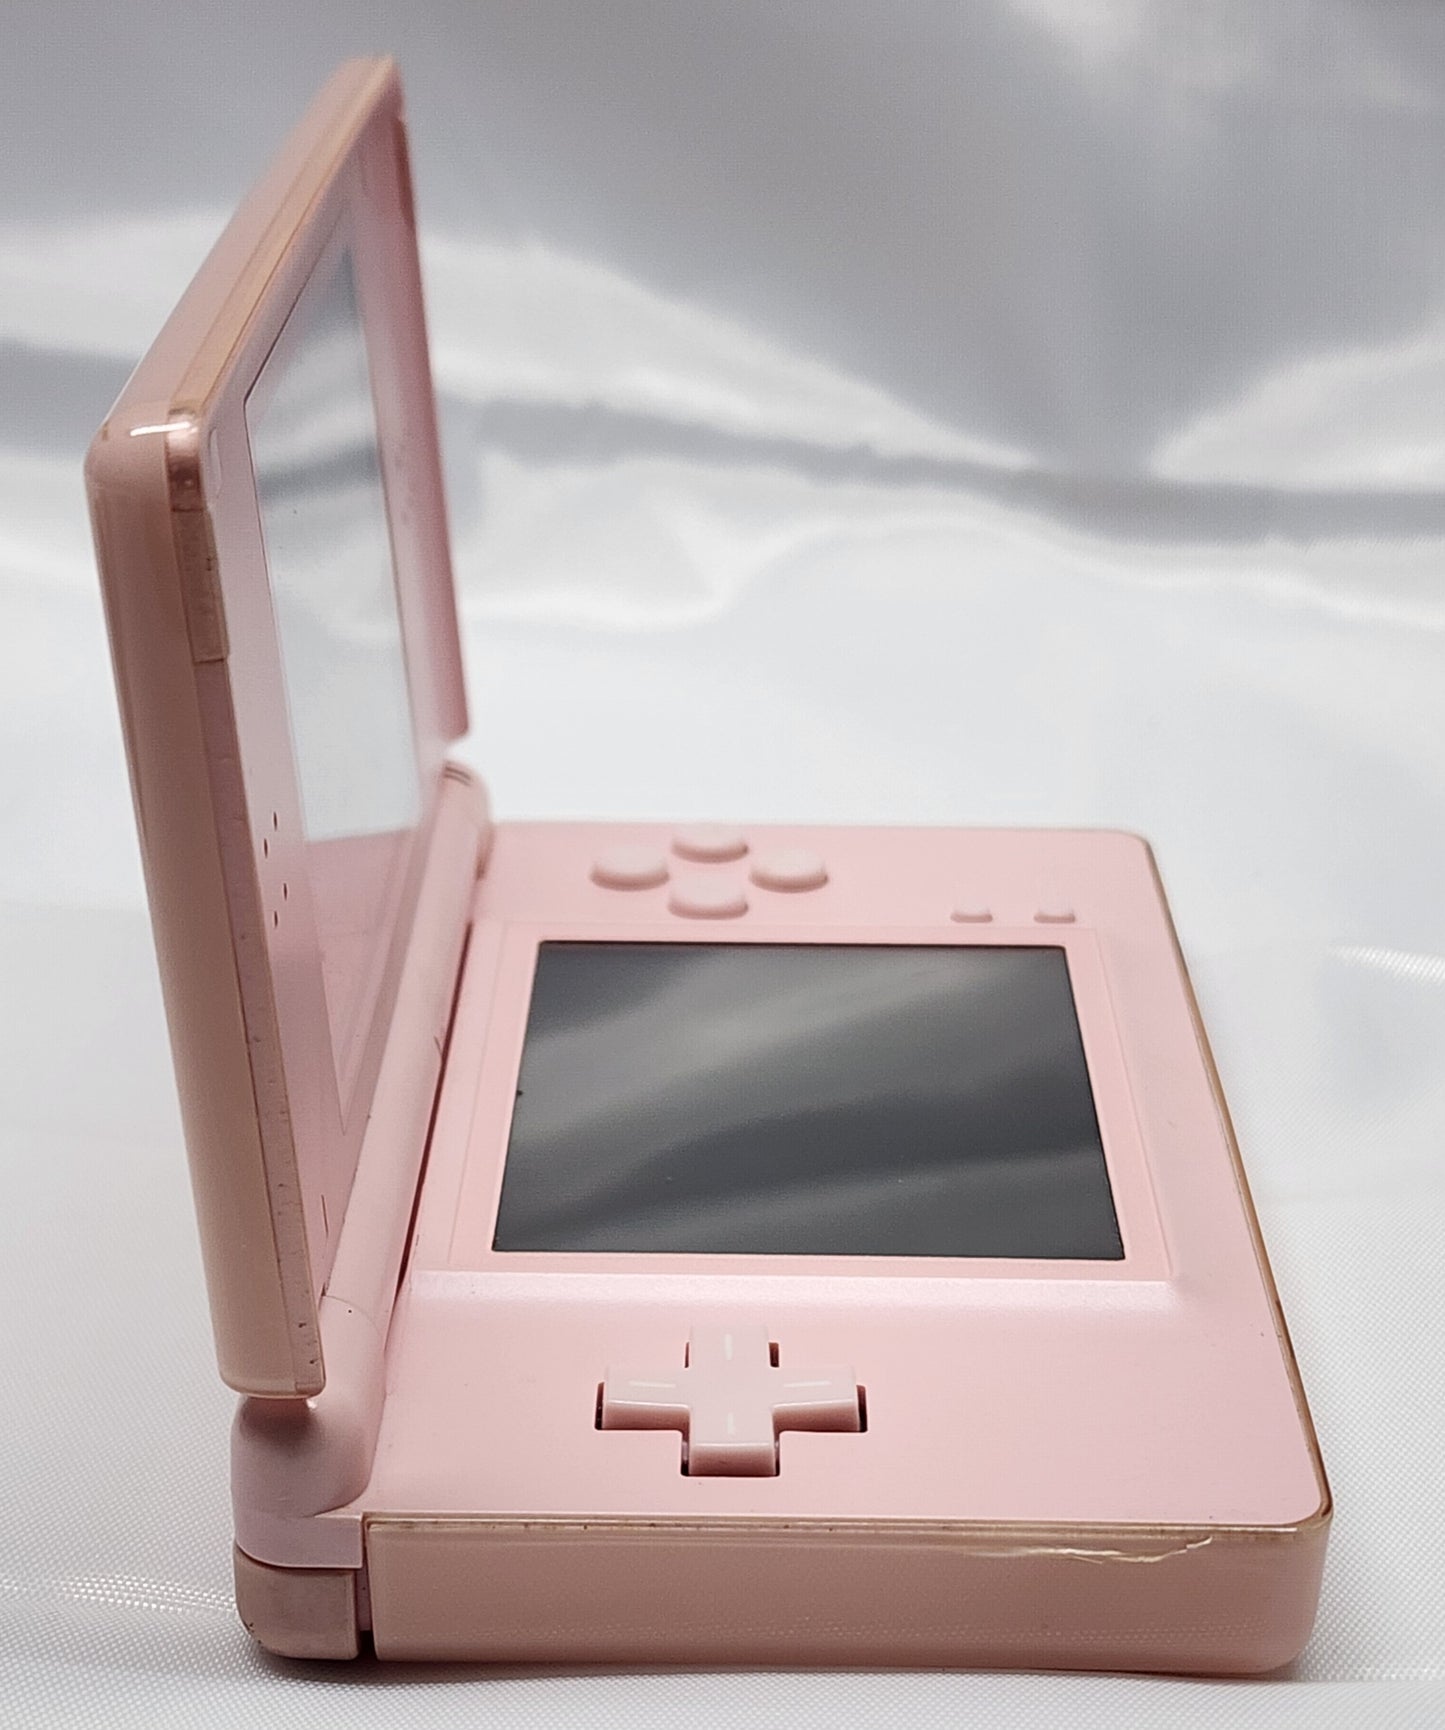 Pink DSlite. Charger & Stylus Included. Works Great.